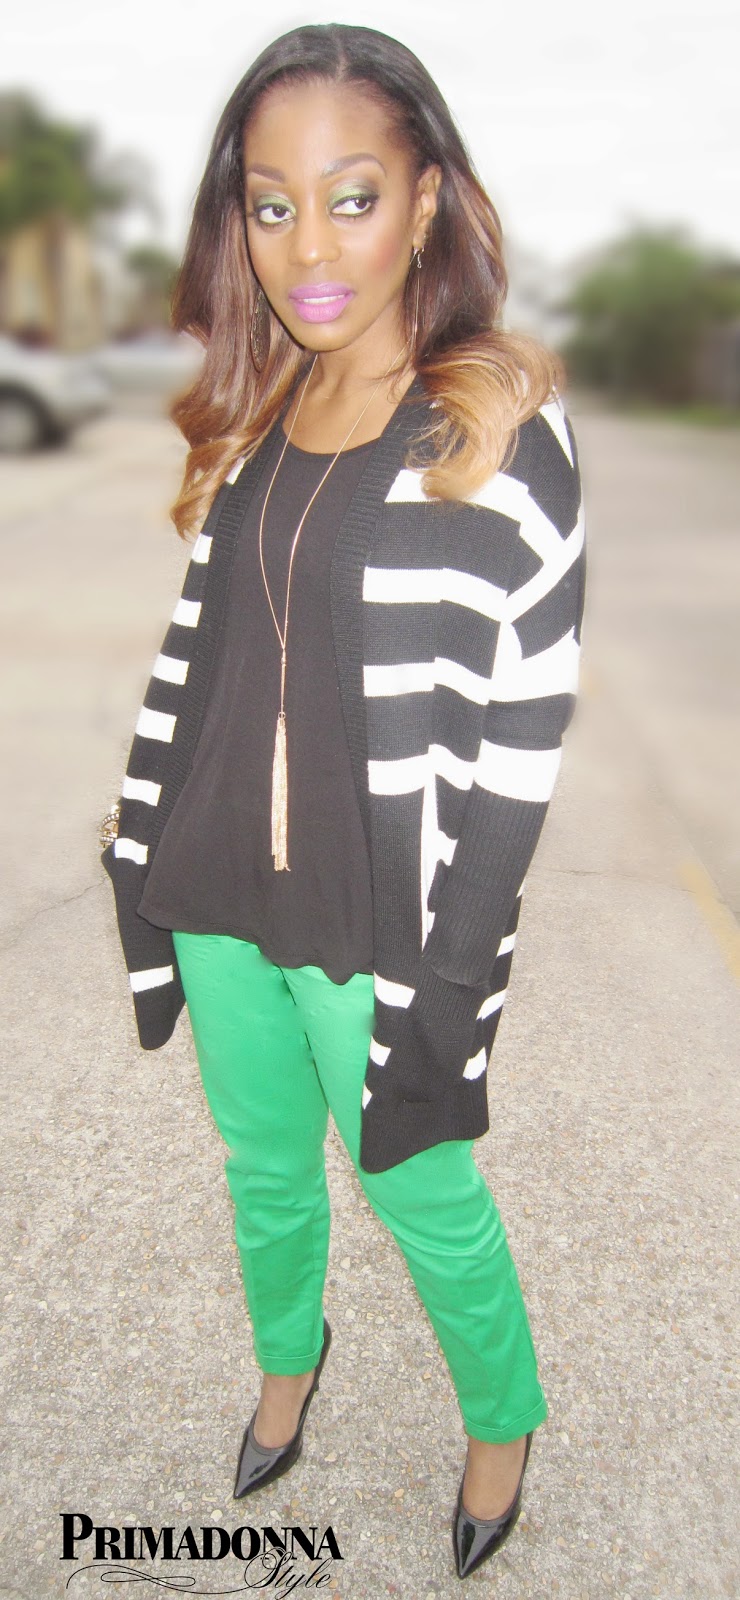 Catherine Malandrino for DesigNation Over-sized Striped Sweater H&M Oversized Black Top Worthington Wide Waistband Slim Pants in Total Green Rock & Republic Patent Heels Capsule by Cara Gold Tassel Necklace